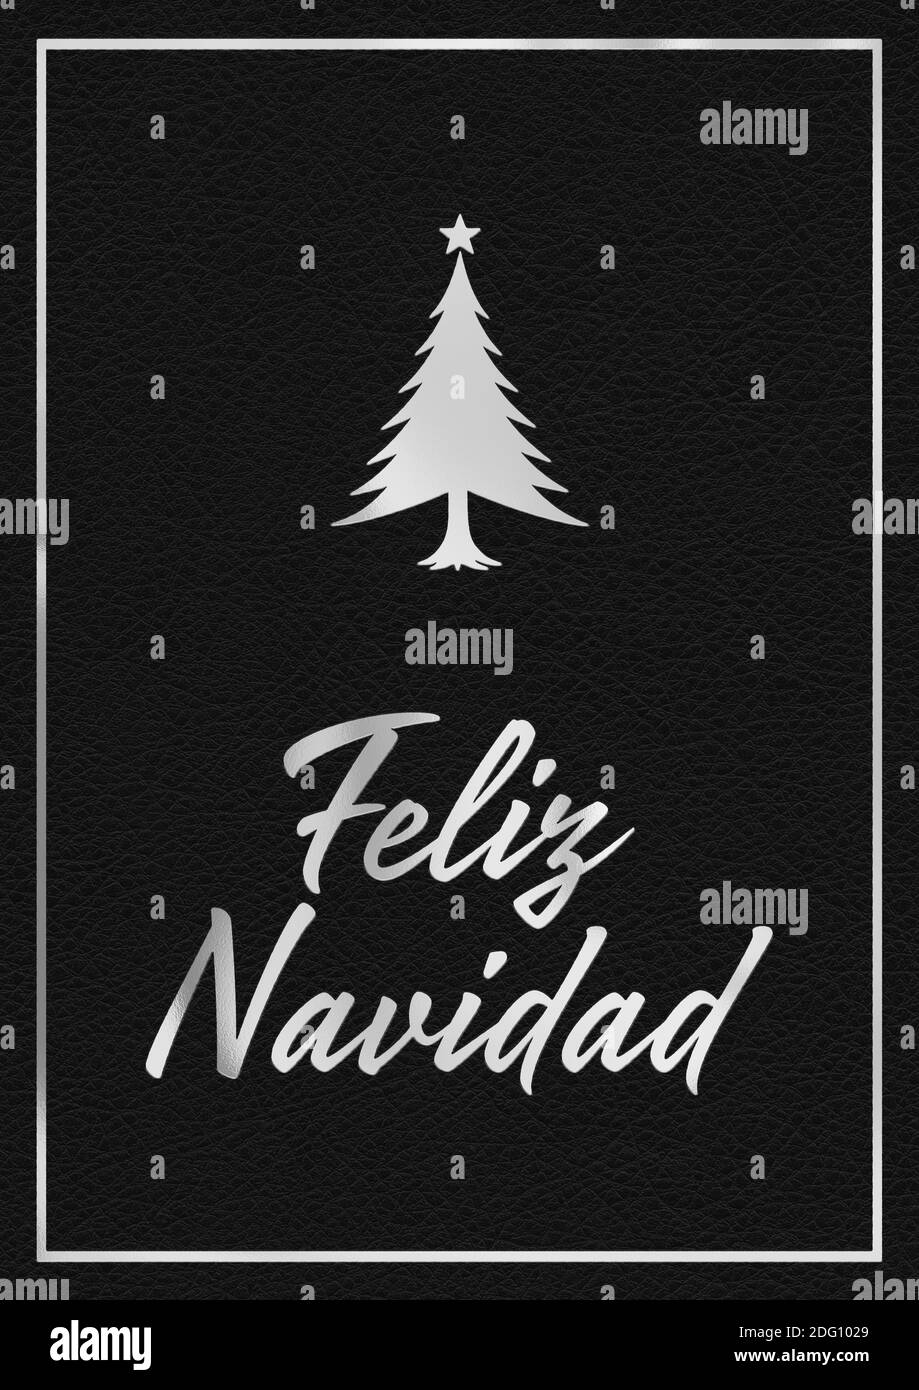 A silver leaf and black leather effect festive FELIZ NAVIDAD typographical graphic illustration with black leather background Stock Photo